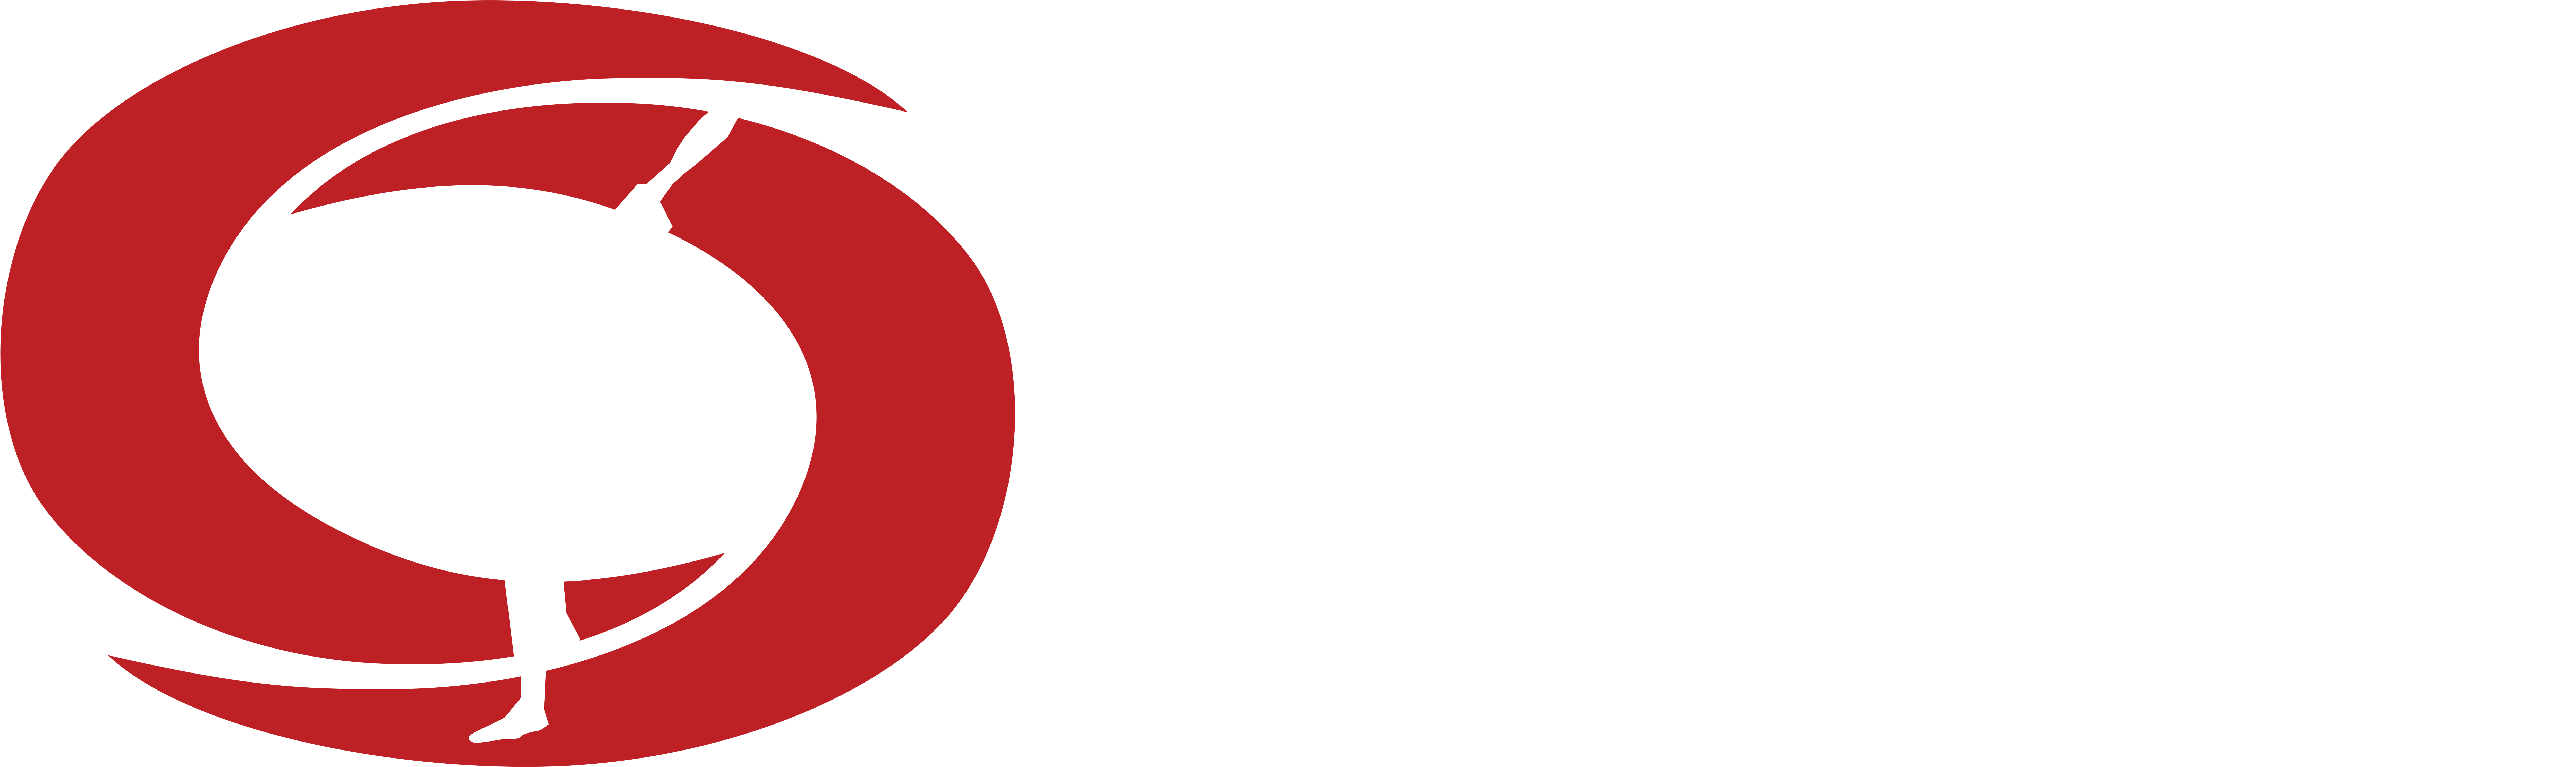 Hastings Martial Arts Is Dedicated To Providing Quality - Hastings Martial Arts (12600x3682)